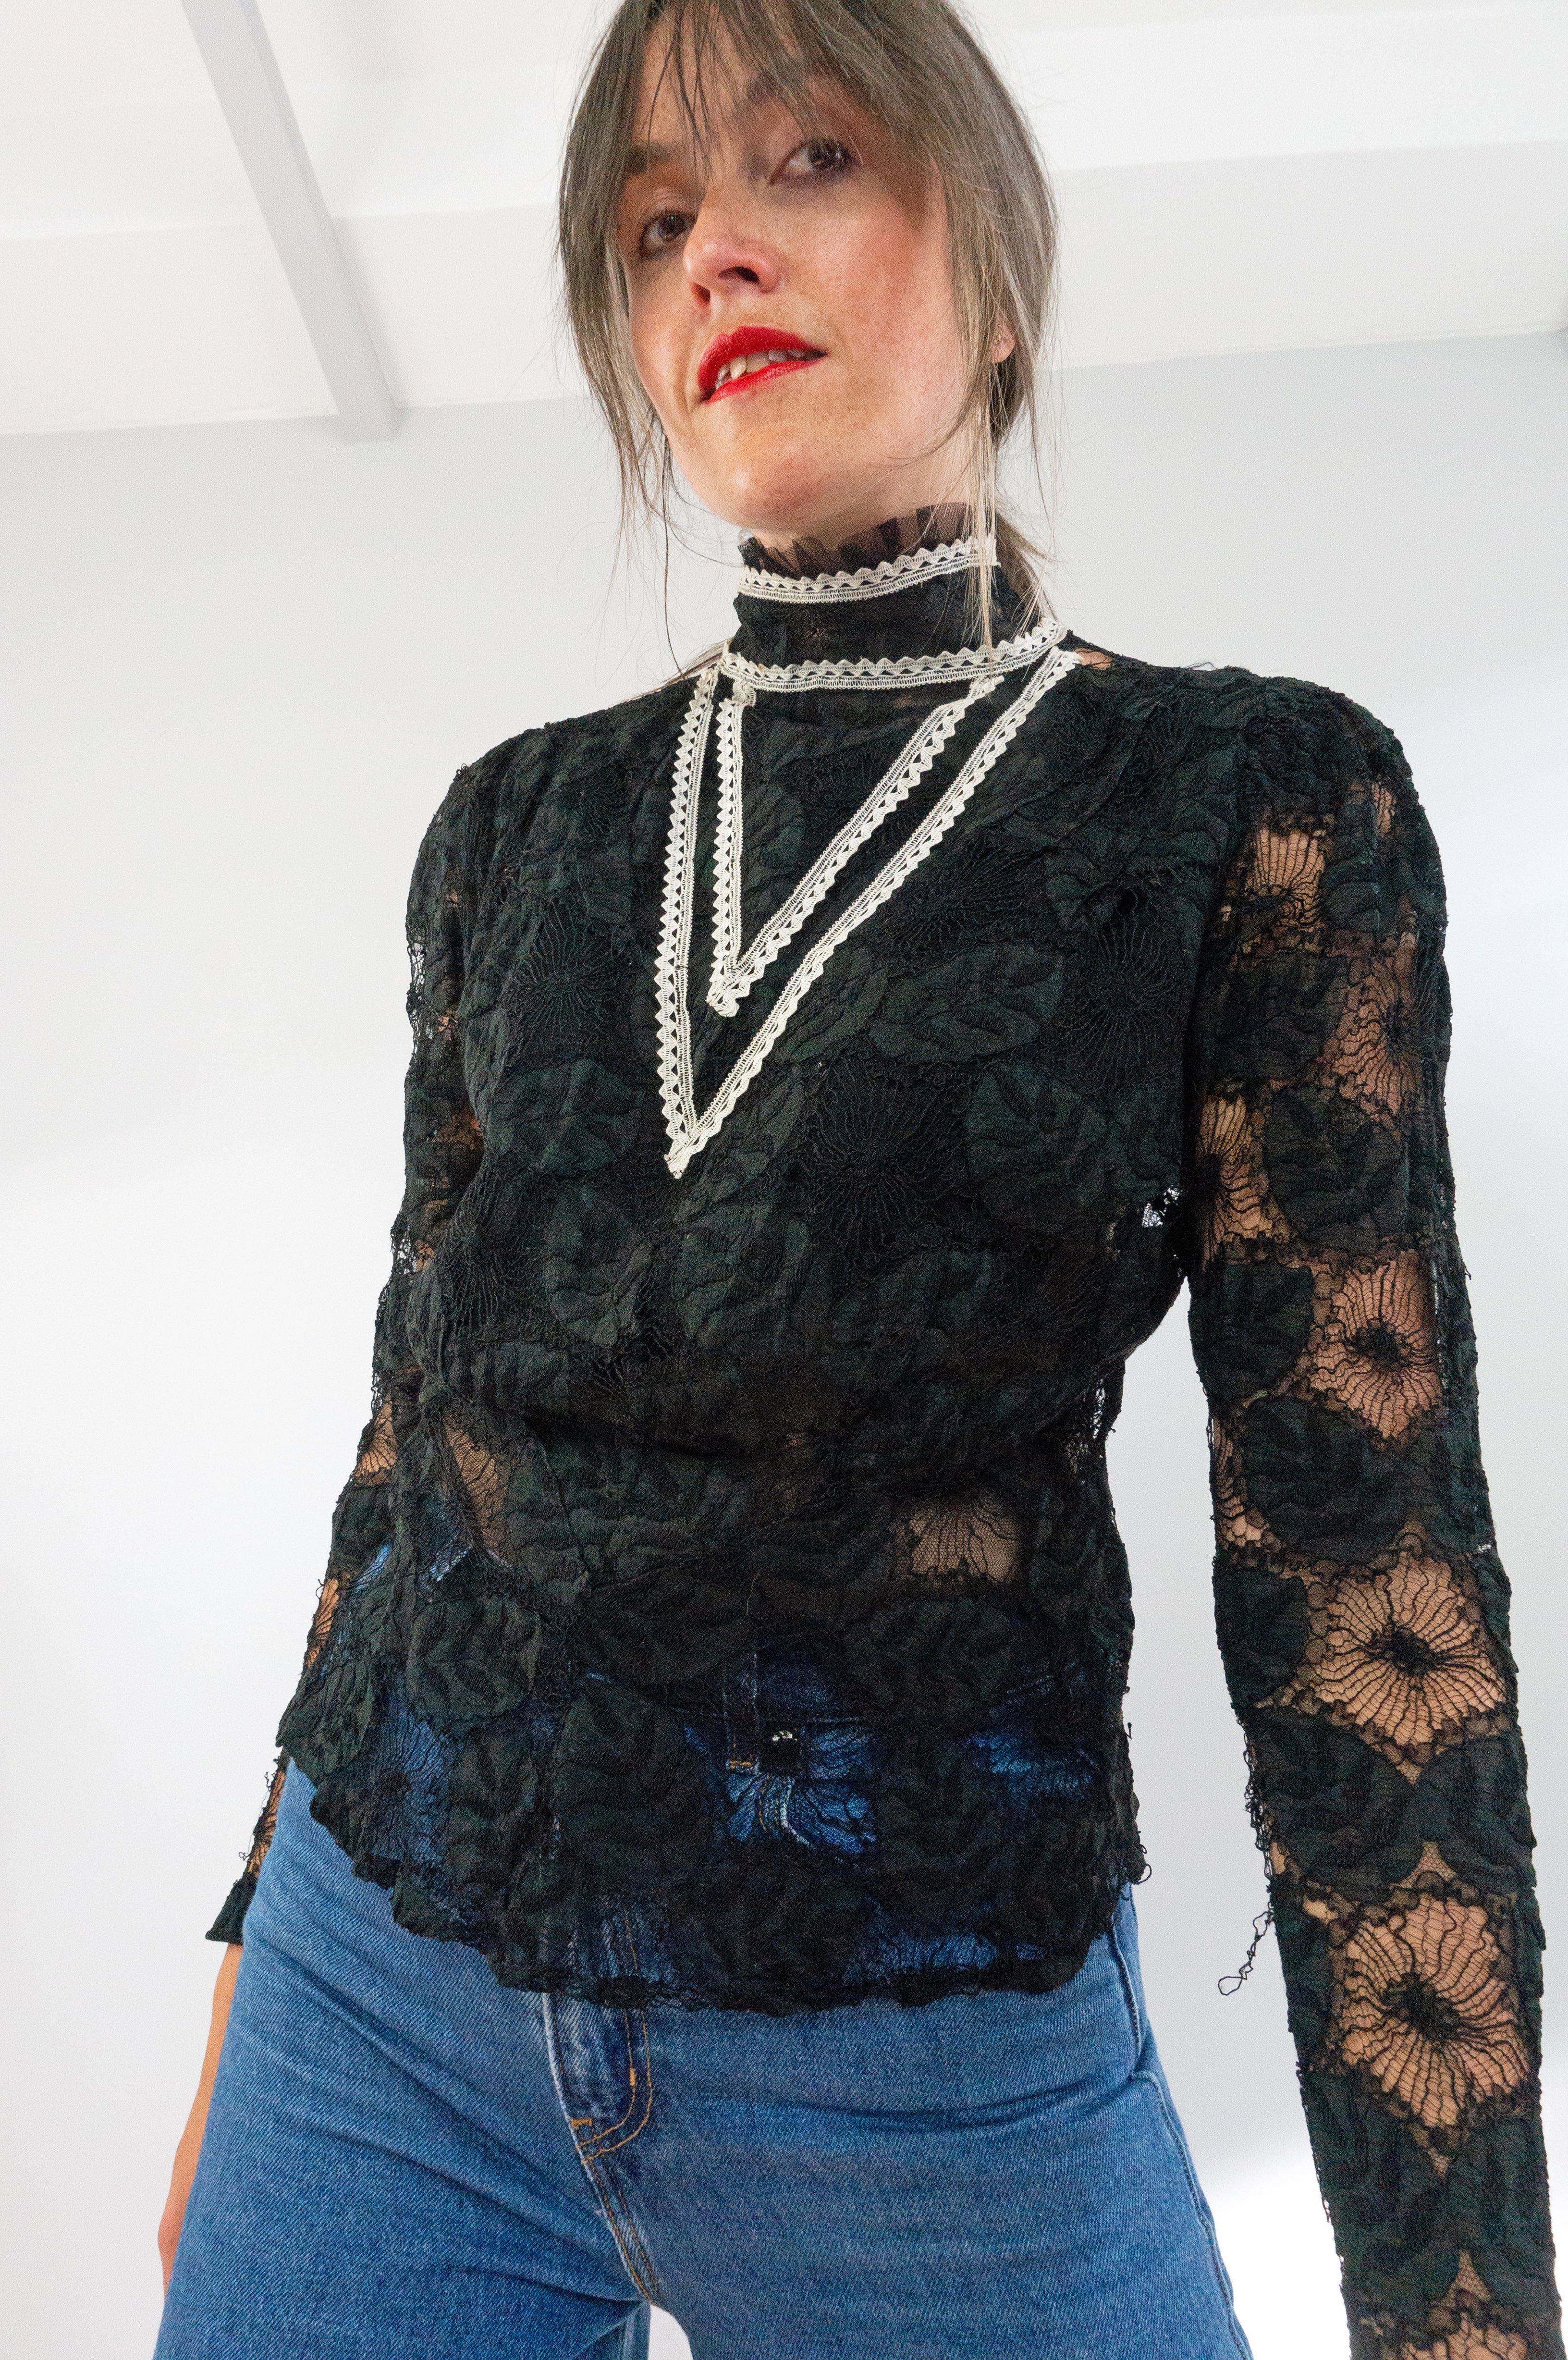 Victorian Ruffle Neck Sheer Black Lace Blouse